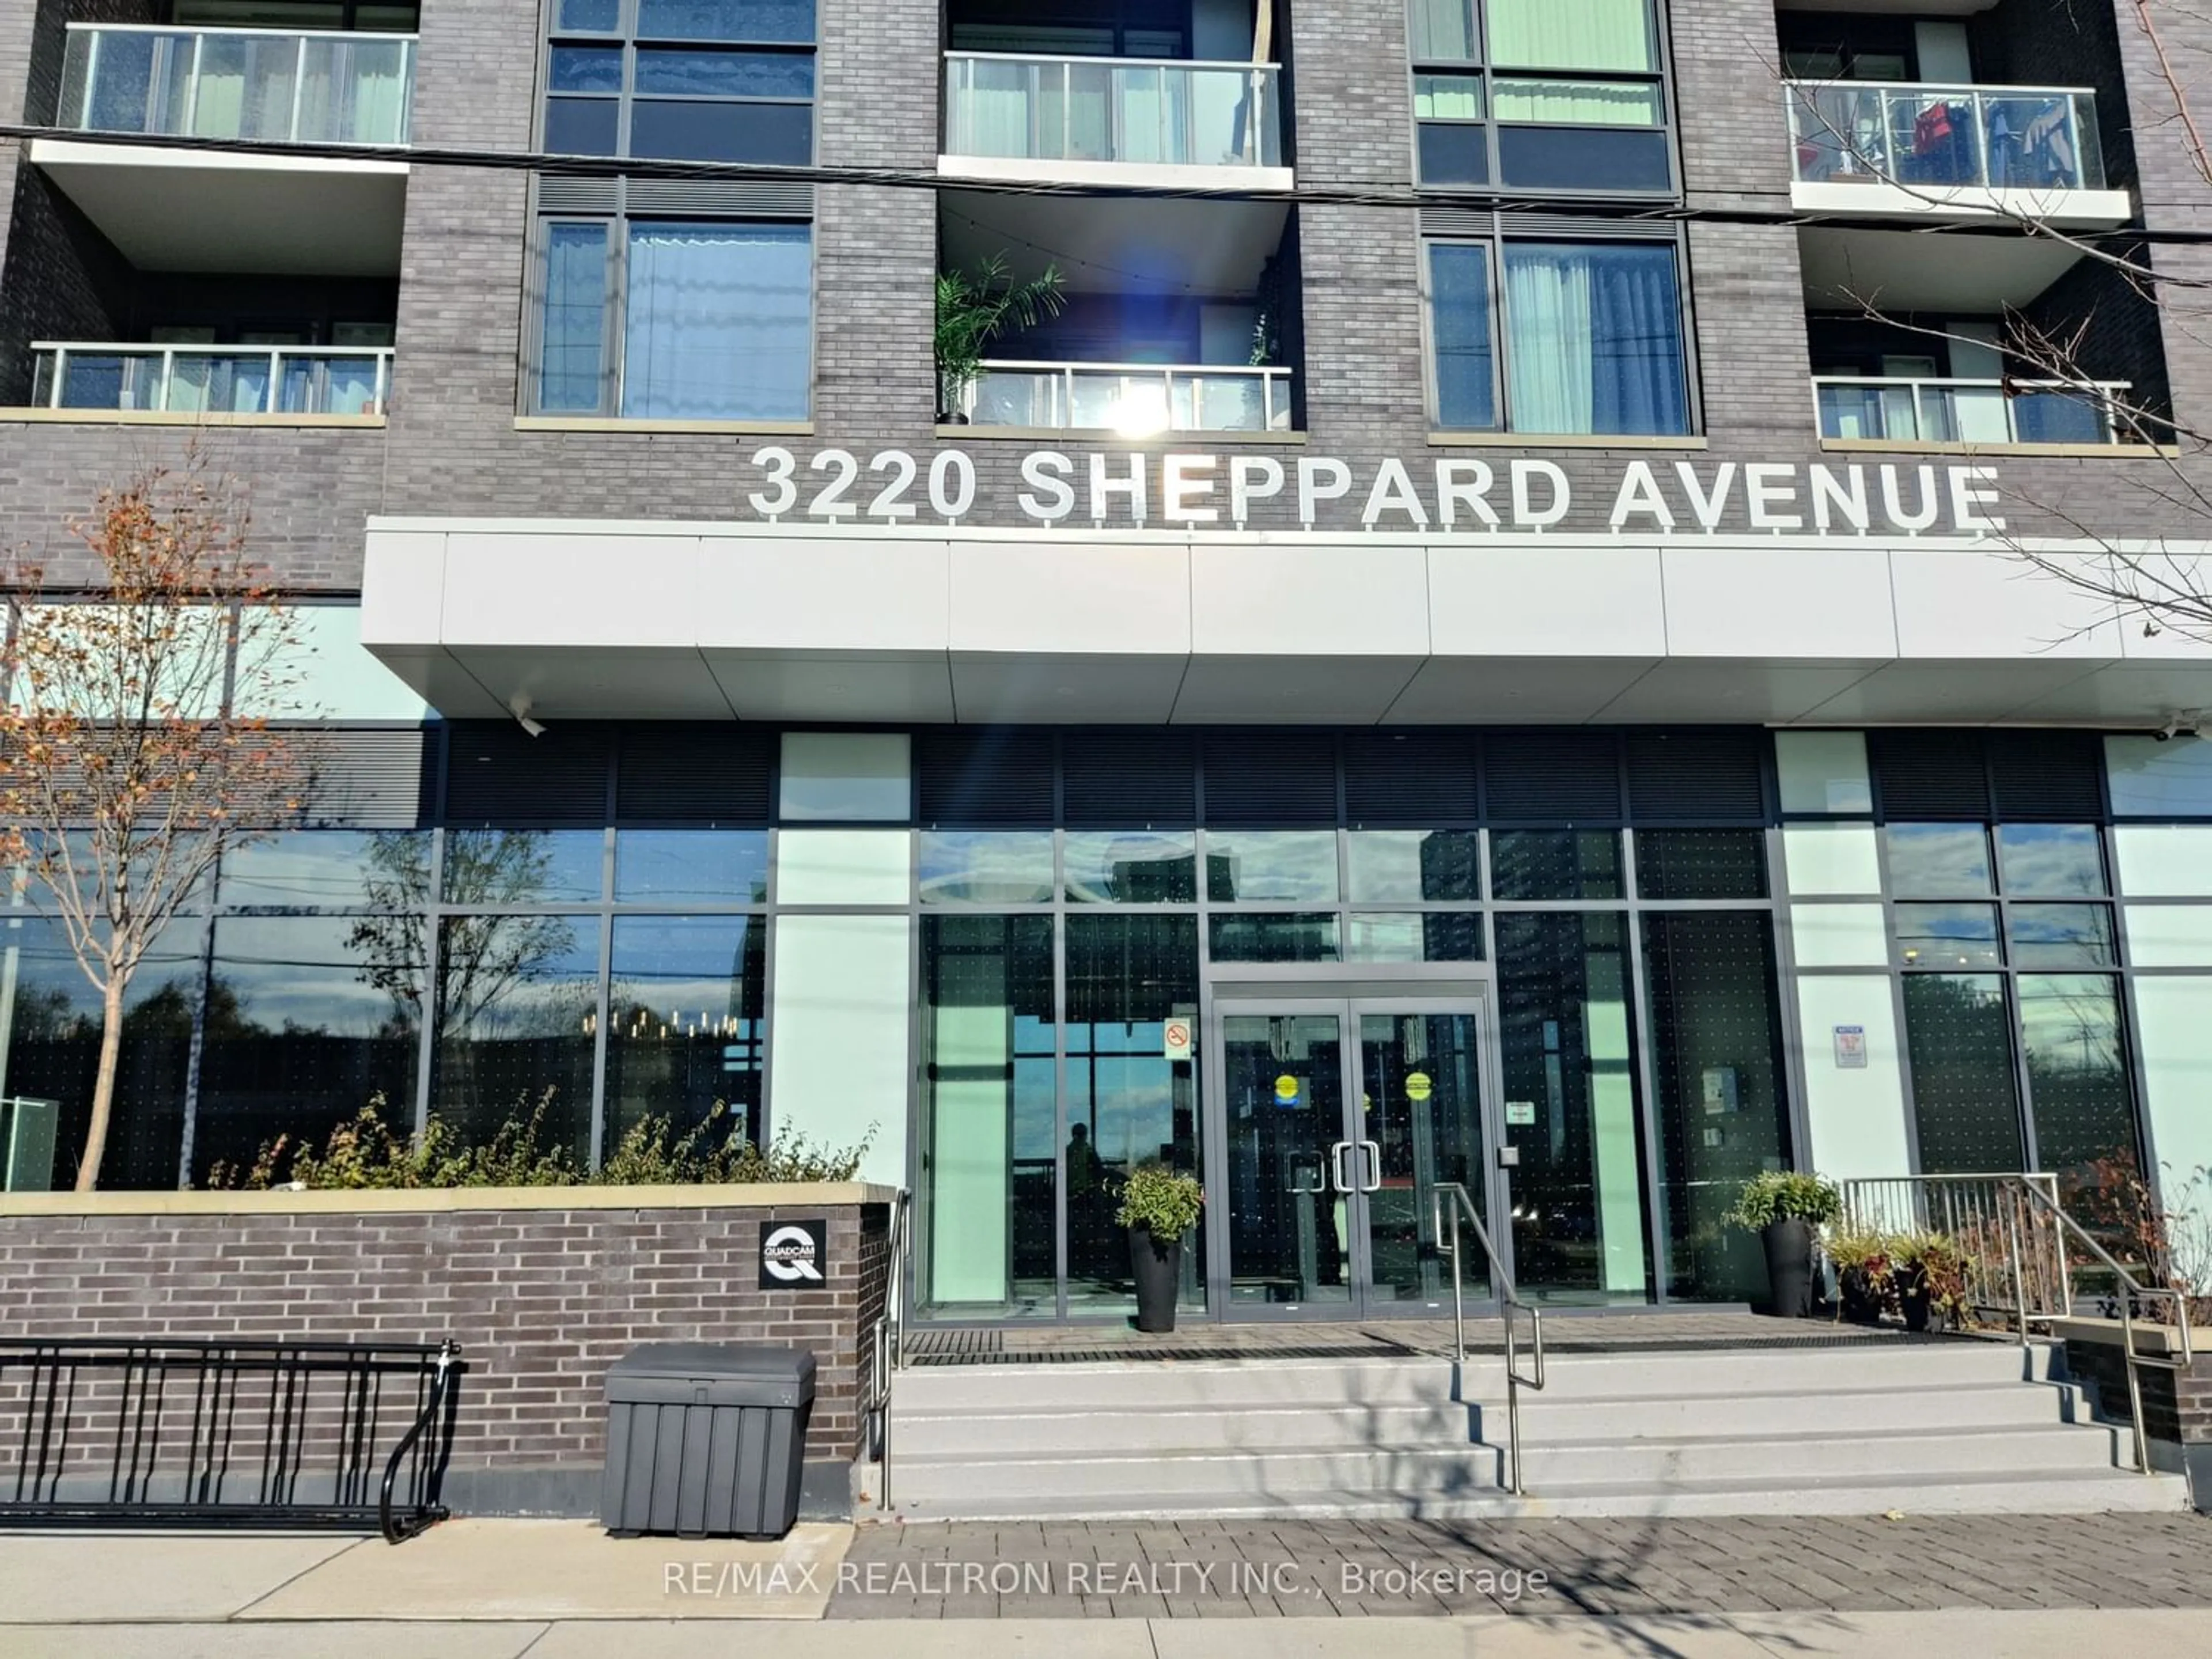 A pic from exterior of the house or condo for 3220 Sheppard Ave #107, Toronto Ontario M1T 0B7